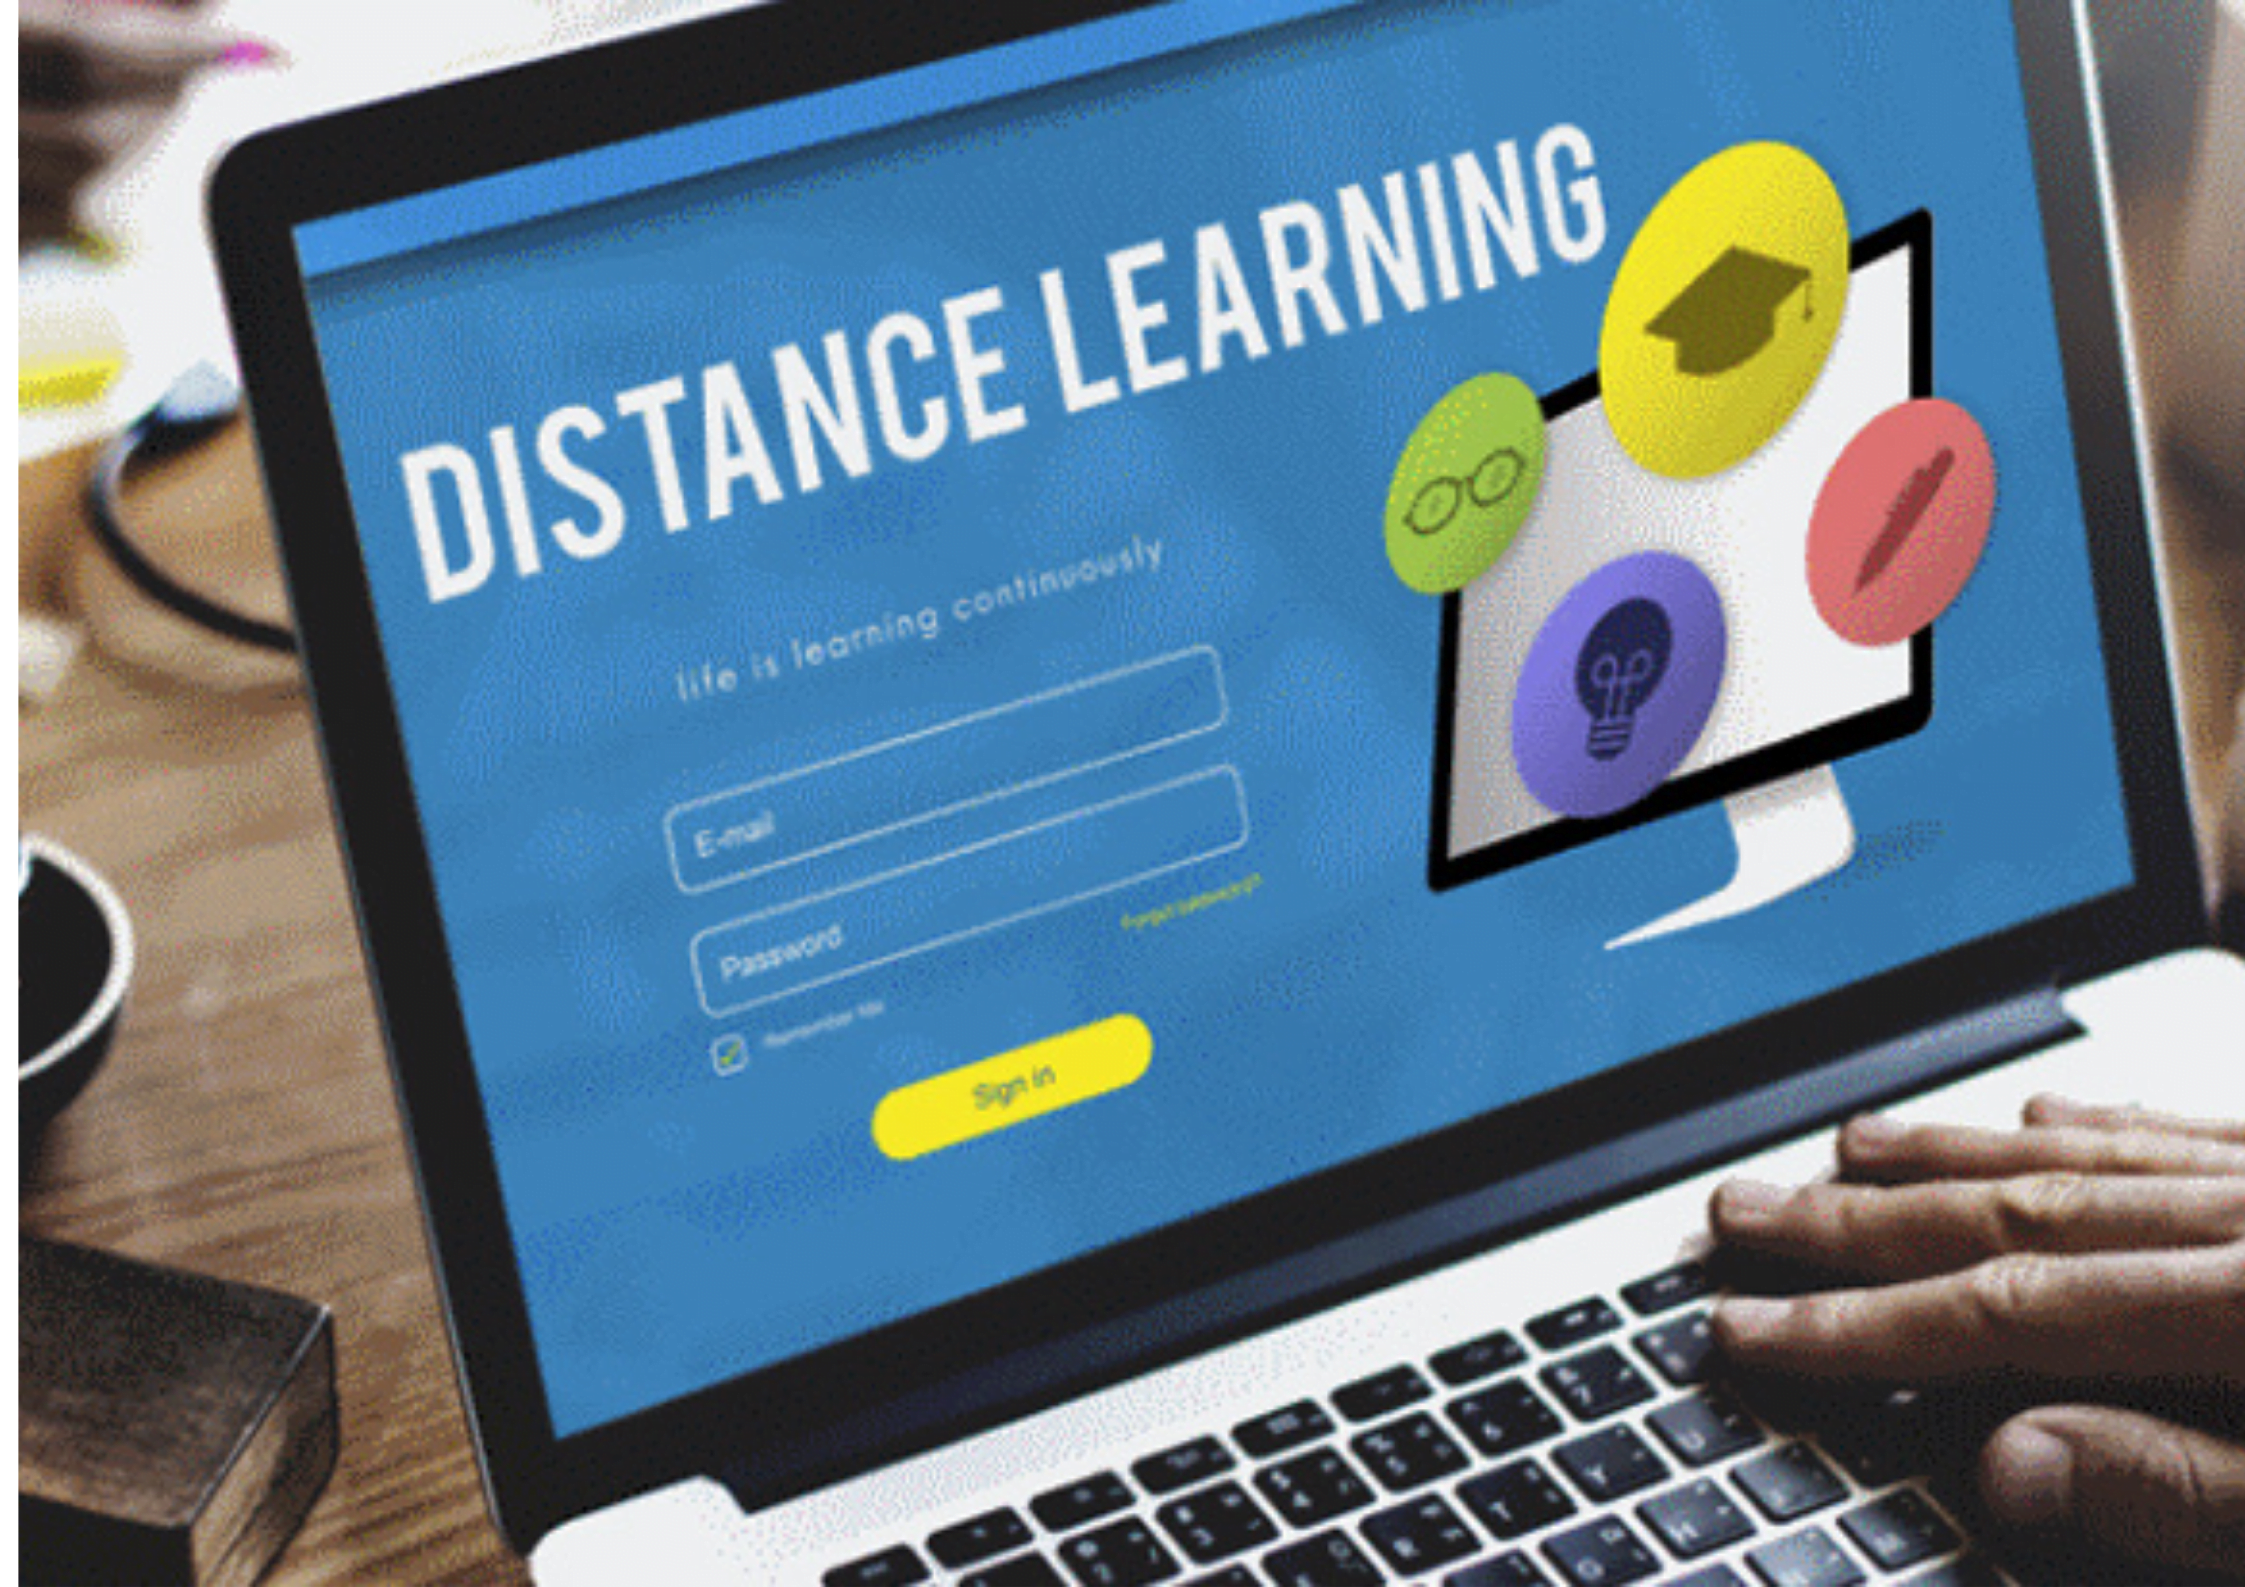 You are currently viewing The role of technology in distant learning